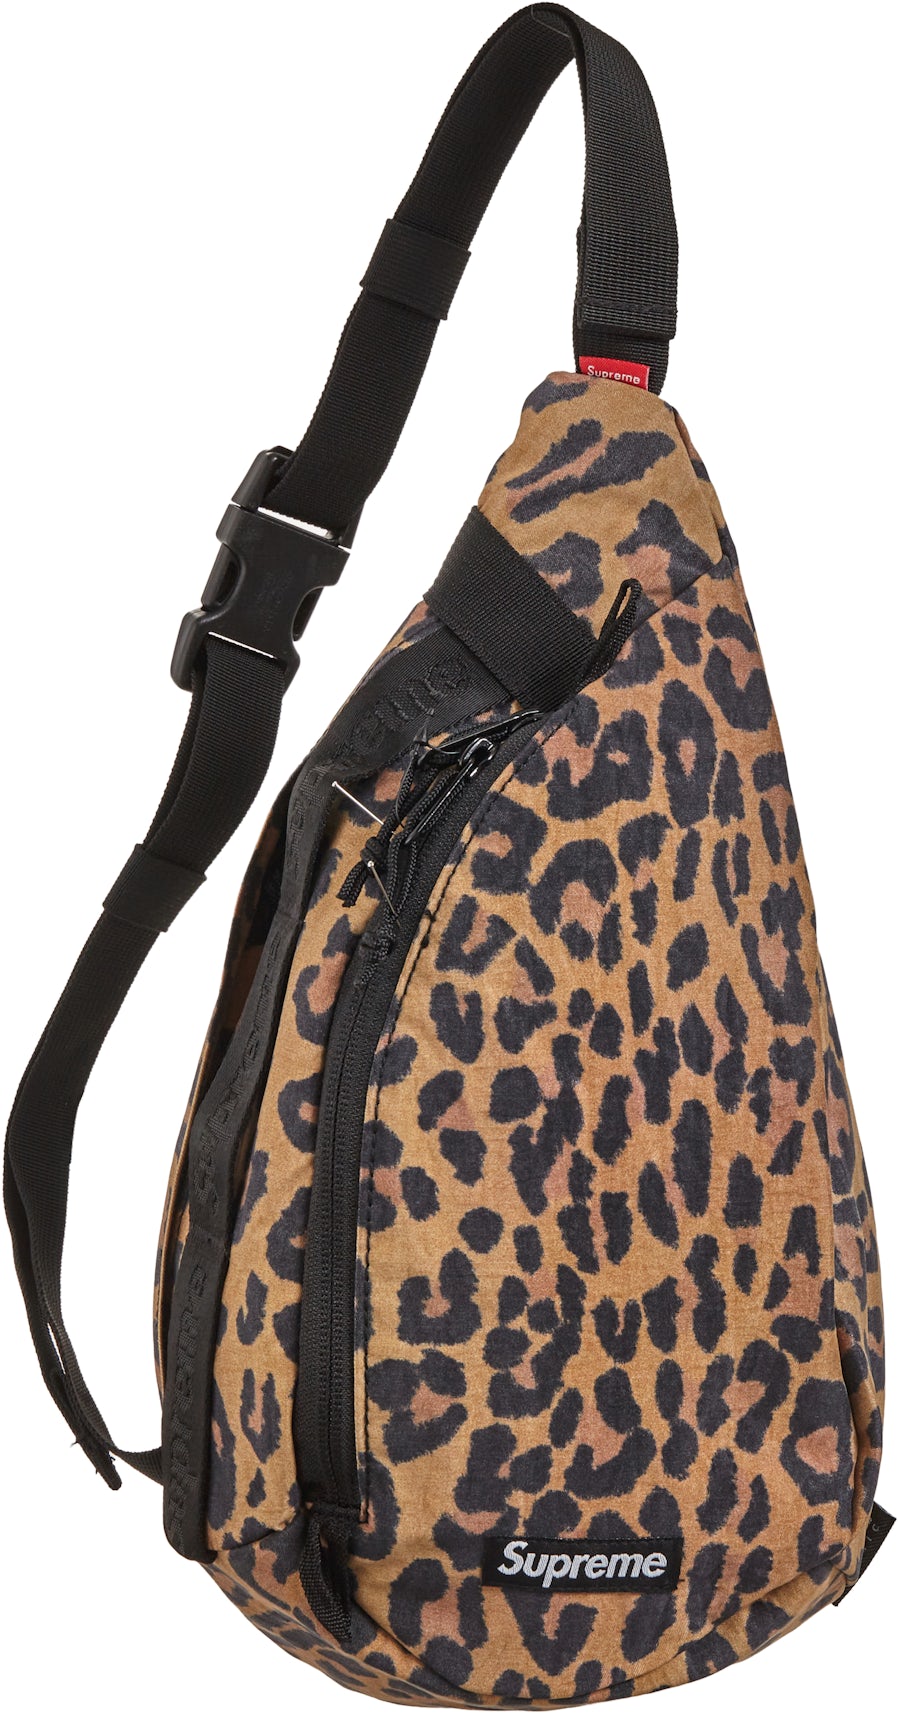 Leopard About Town Crossbody Tote